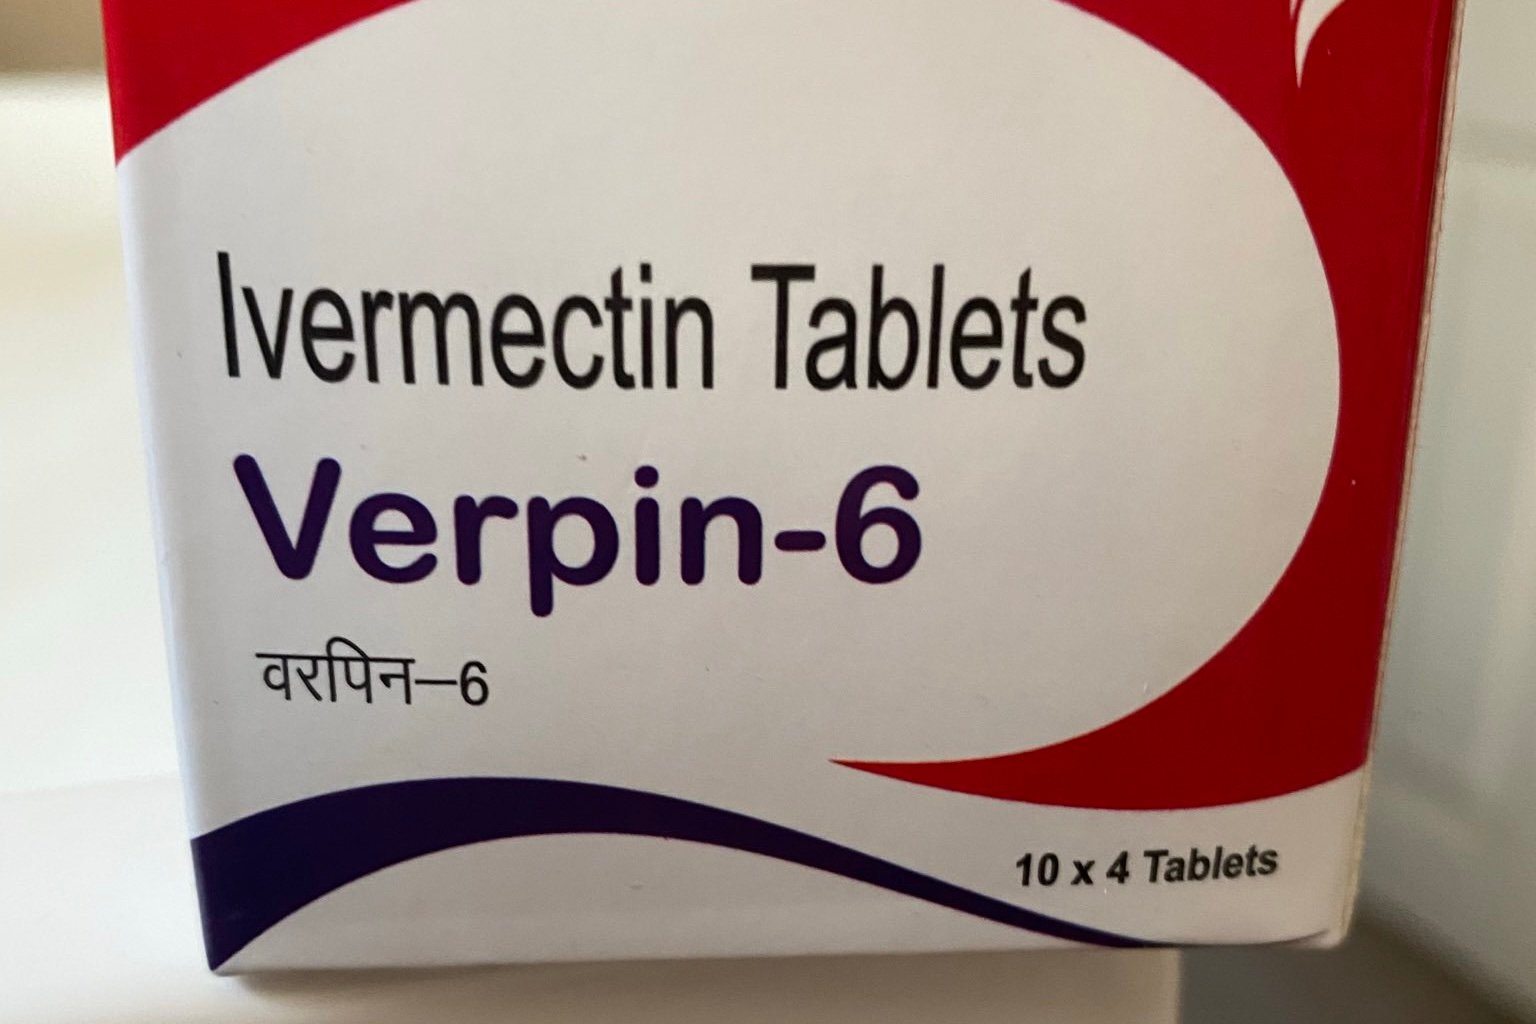 UPDATE: 71 out of 75 Districts in Uttar Pradesh, India – Its Most Populated State – Reported No Covid-19 Cases in 24 Hours After Implementing Ivermectin Protocol D88FC0ED-9836-4168-B8ED-CE5622EEACE1